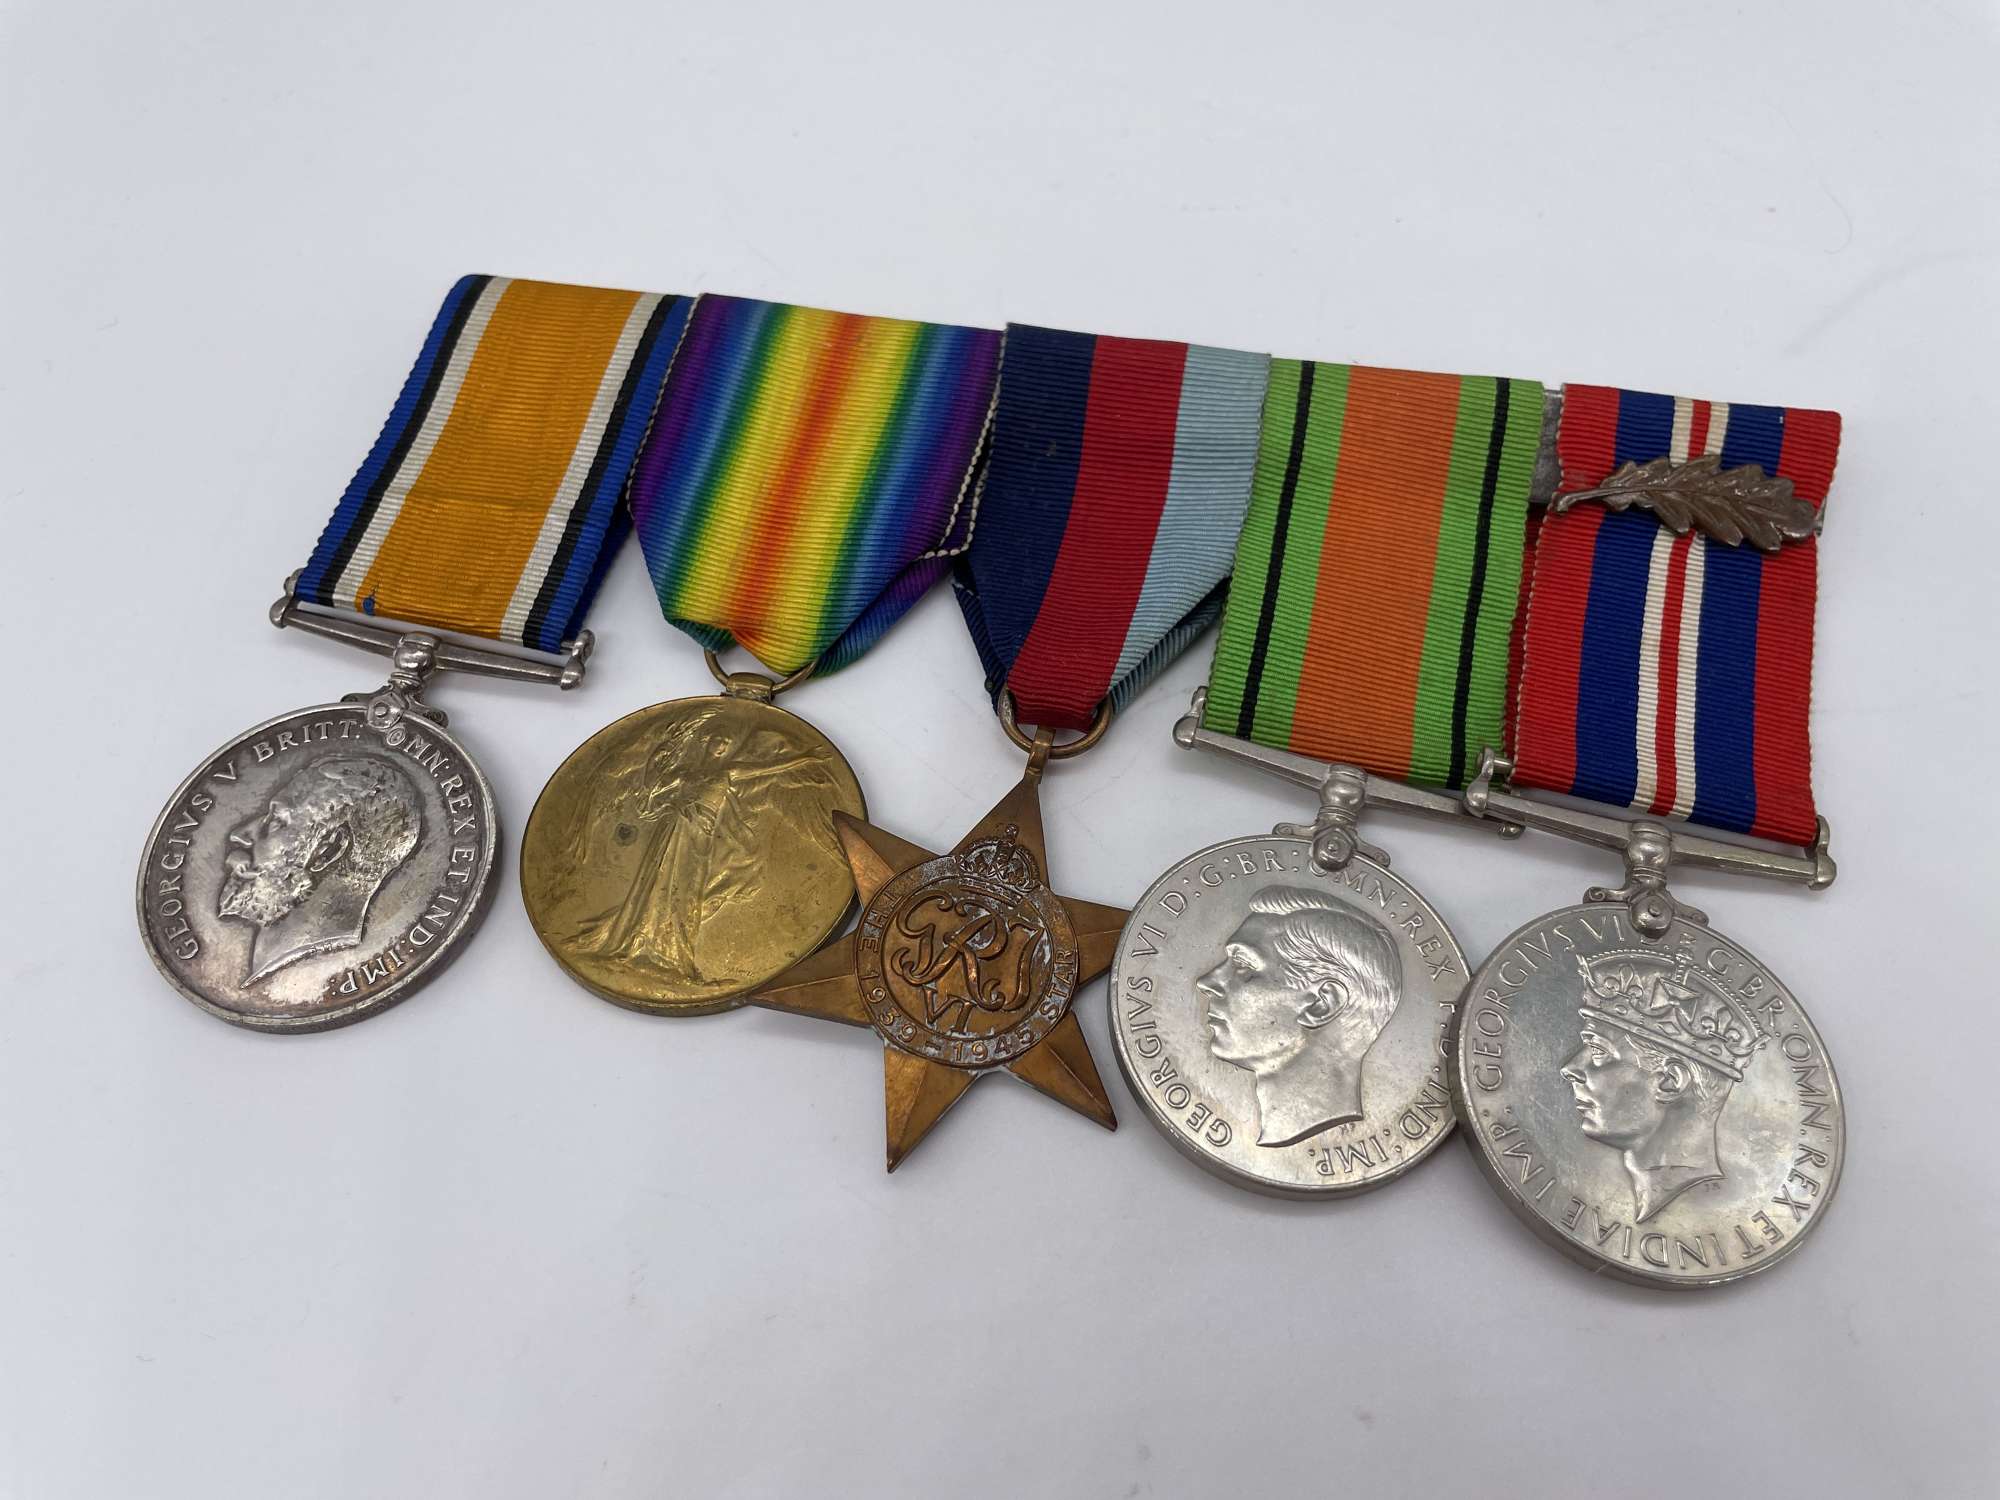 Original Two War Medal Grouping, Officer, Major Goddard, Mentioned in Despatches